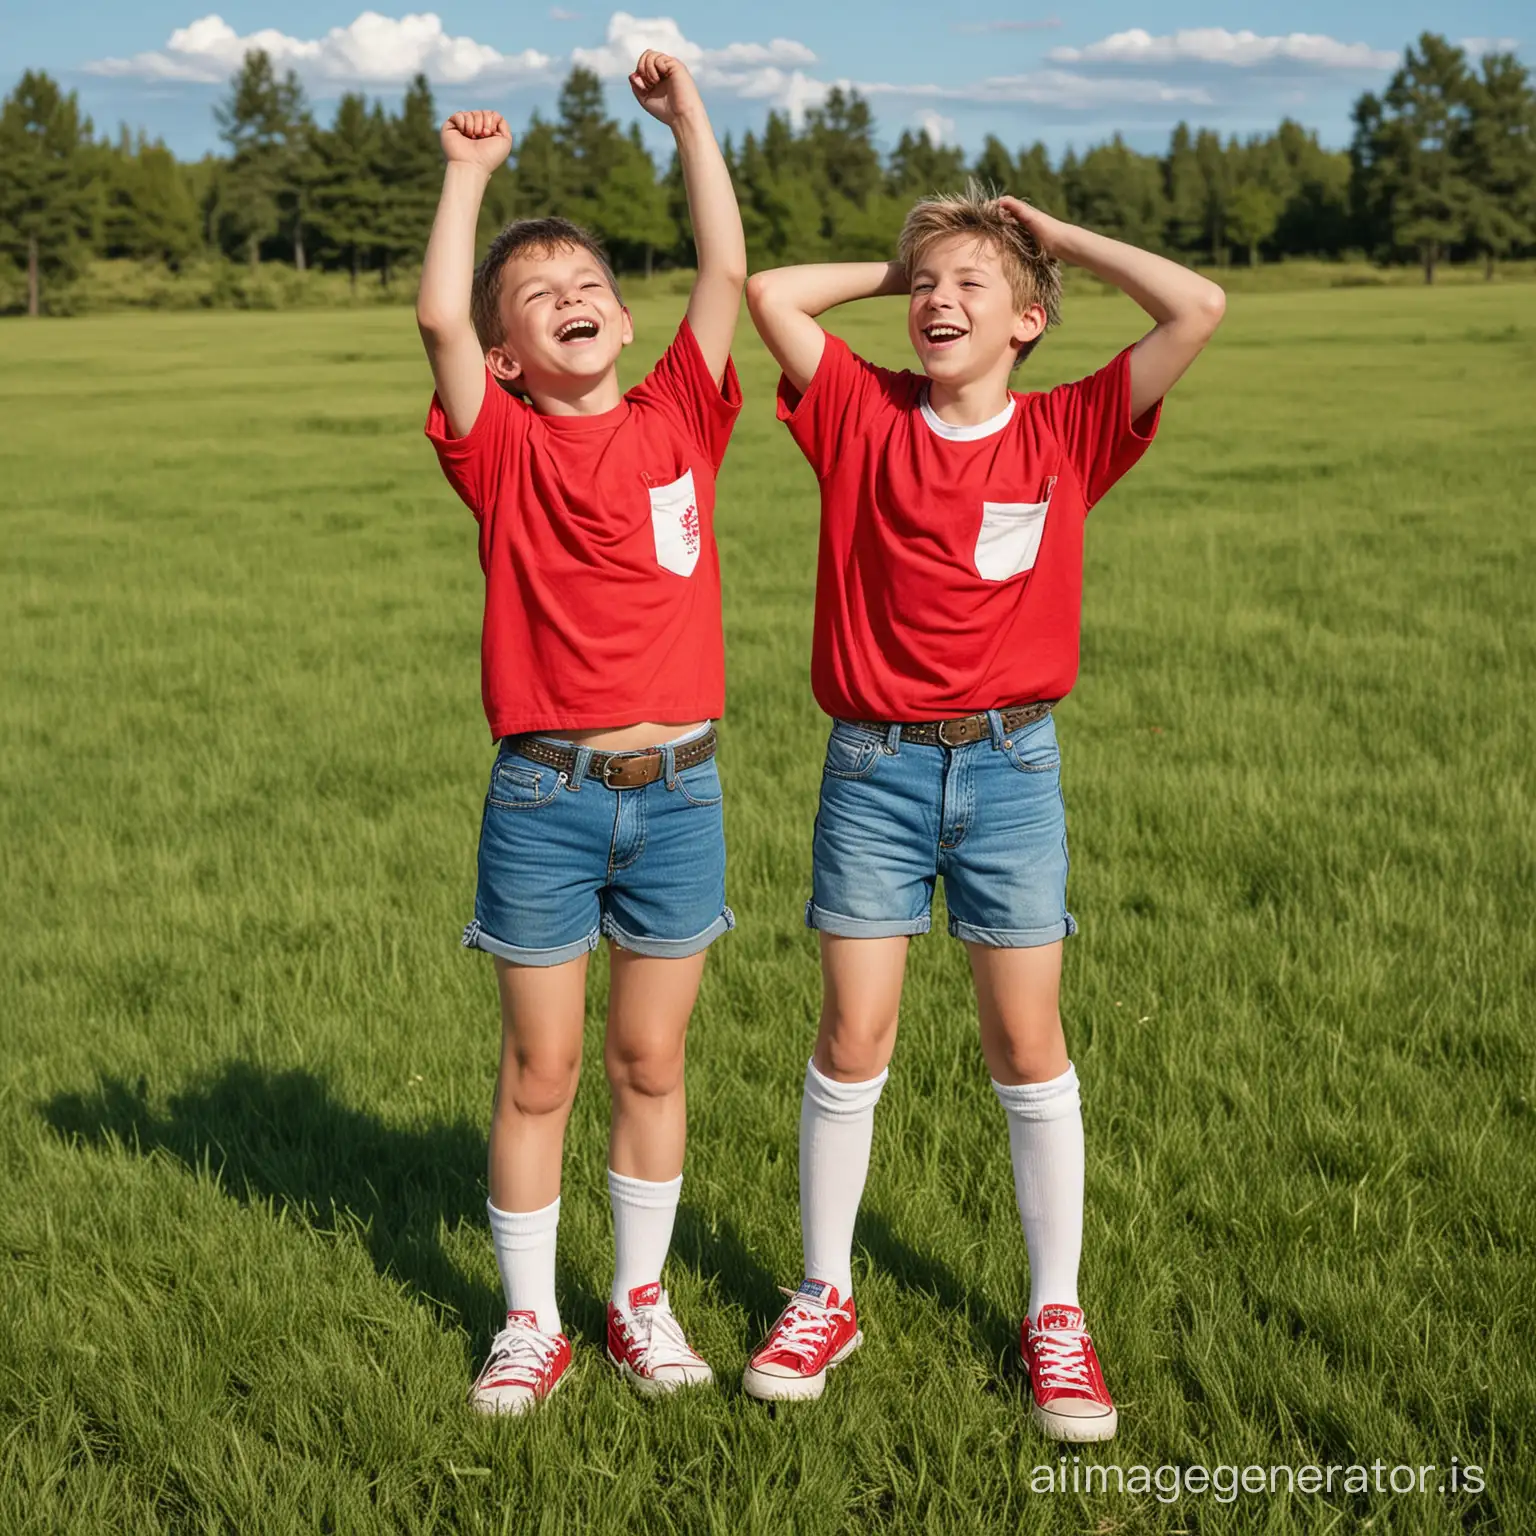 Two 13-year-old boys with disheveled hair, in a red shirt, very short denim shorts with a belt, white knee-high socks, red sneakers are standing on green grass, hands raised above their heads, smiling, the sky is blue without clouds, and a full-length photo of a boy, photo